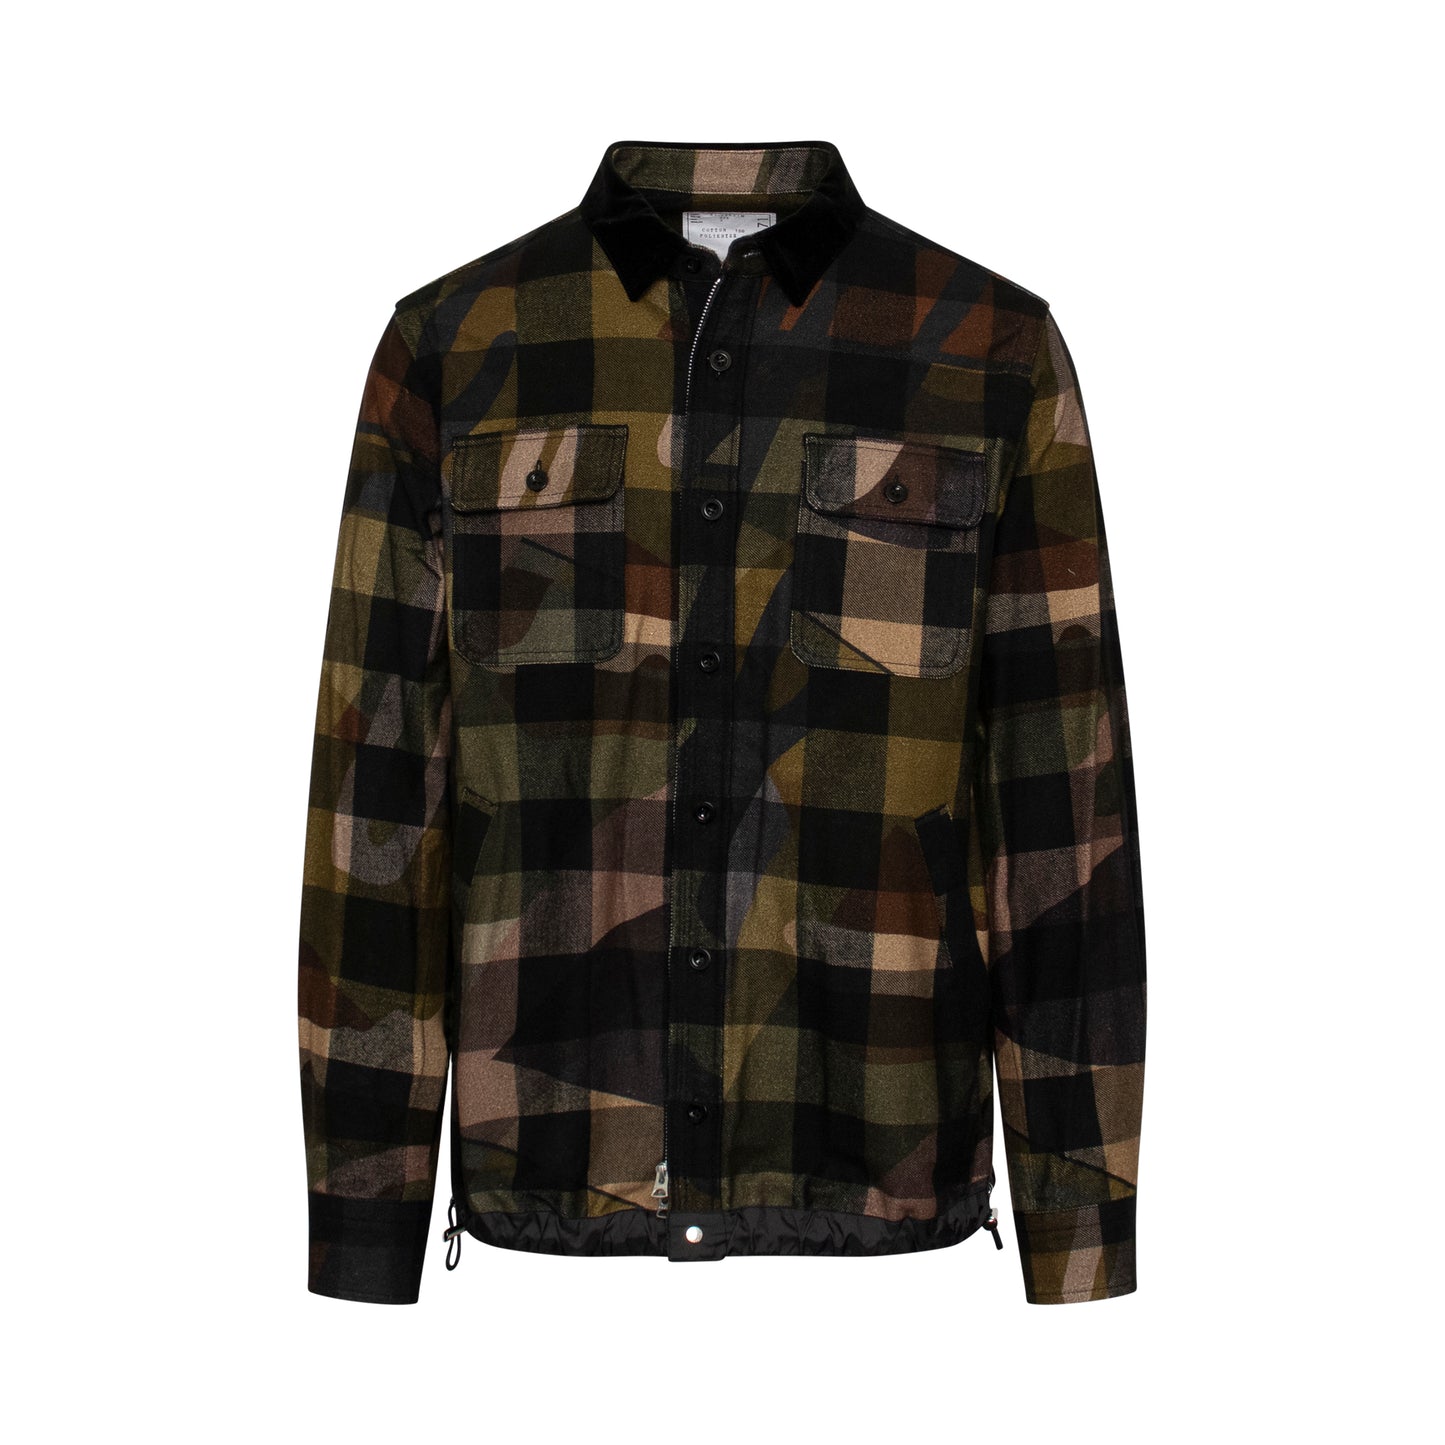 Kaws Print Shirt in Camouflage